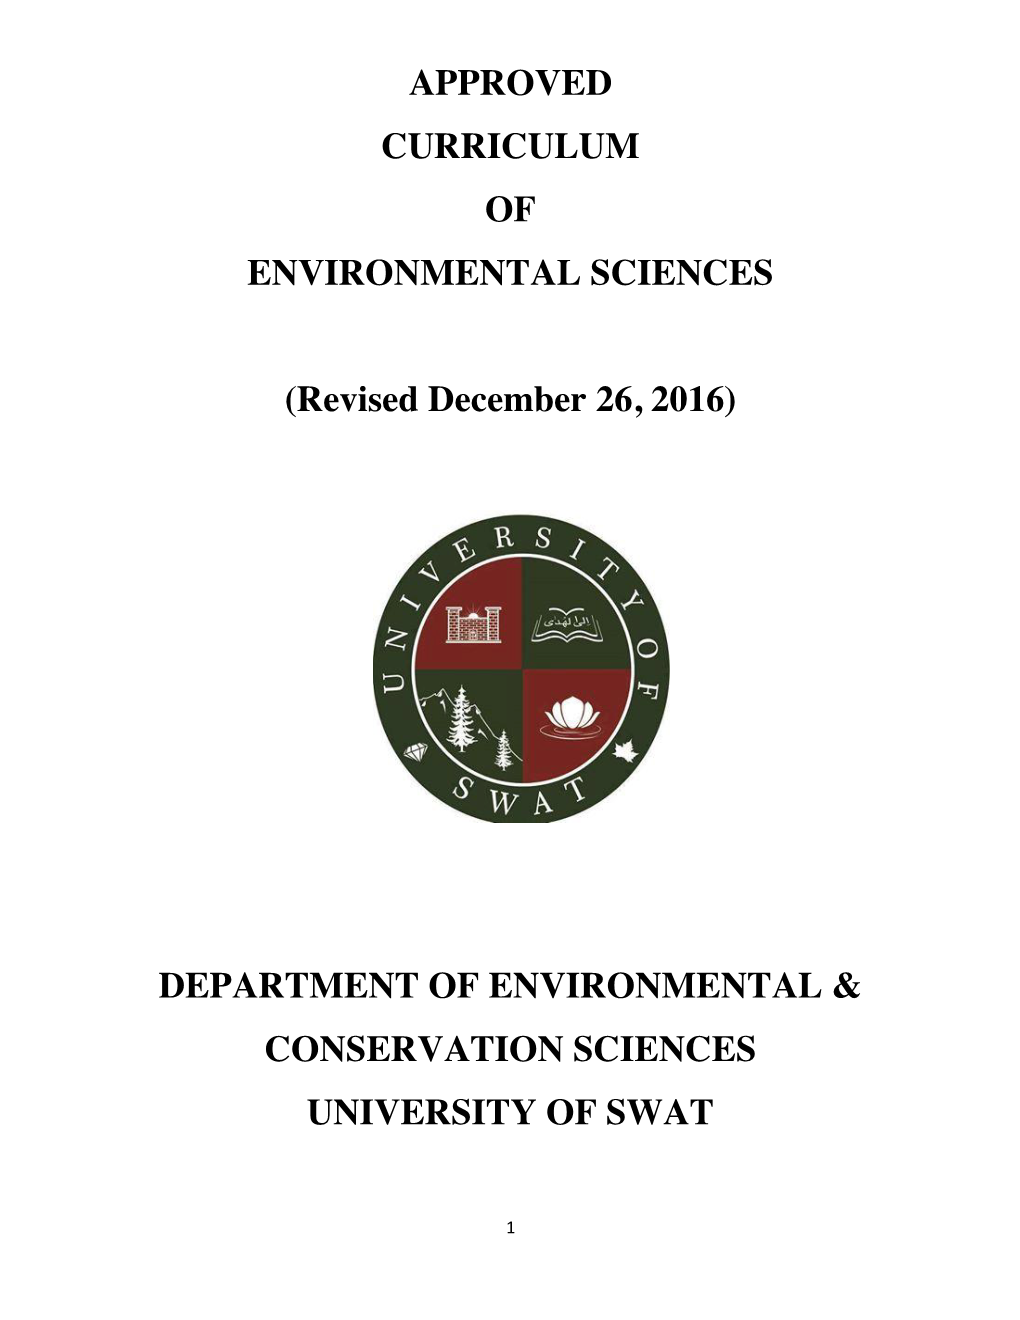 Approved Curriculum of Environmental Sciences